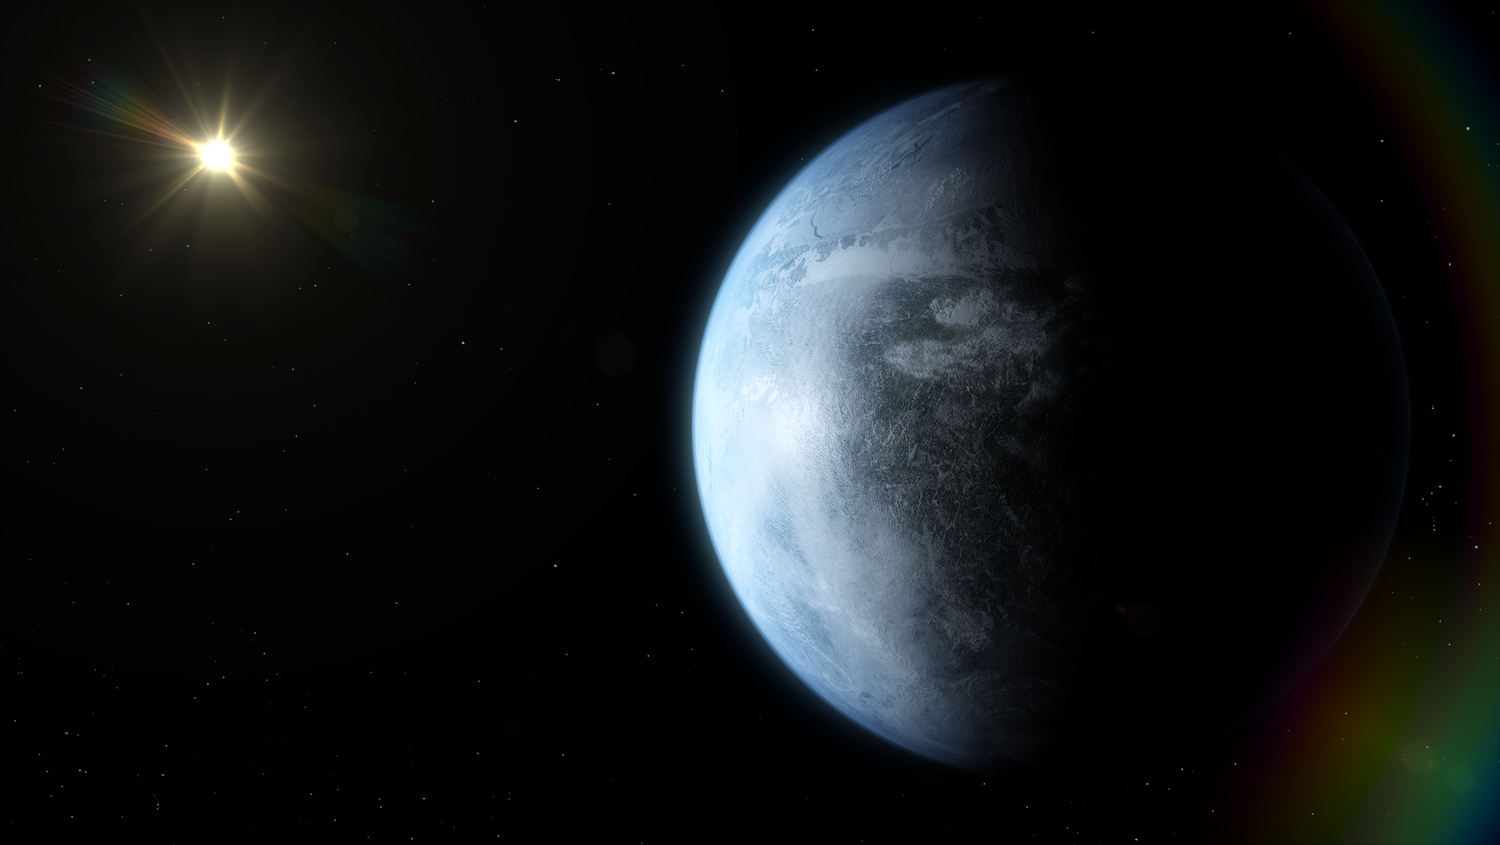 The observations of the international Carmenes project have led to the discovery of 59 exoplanets in four years, a dozen of which might potentially support life.